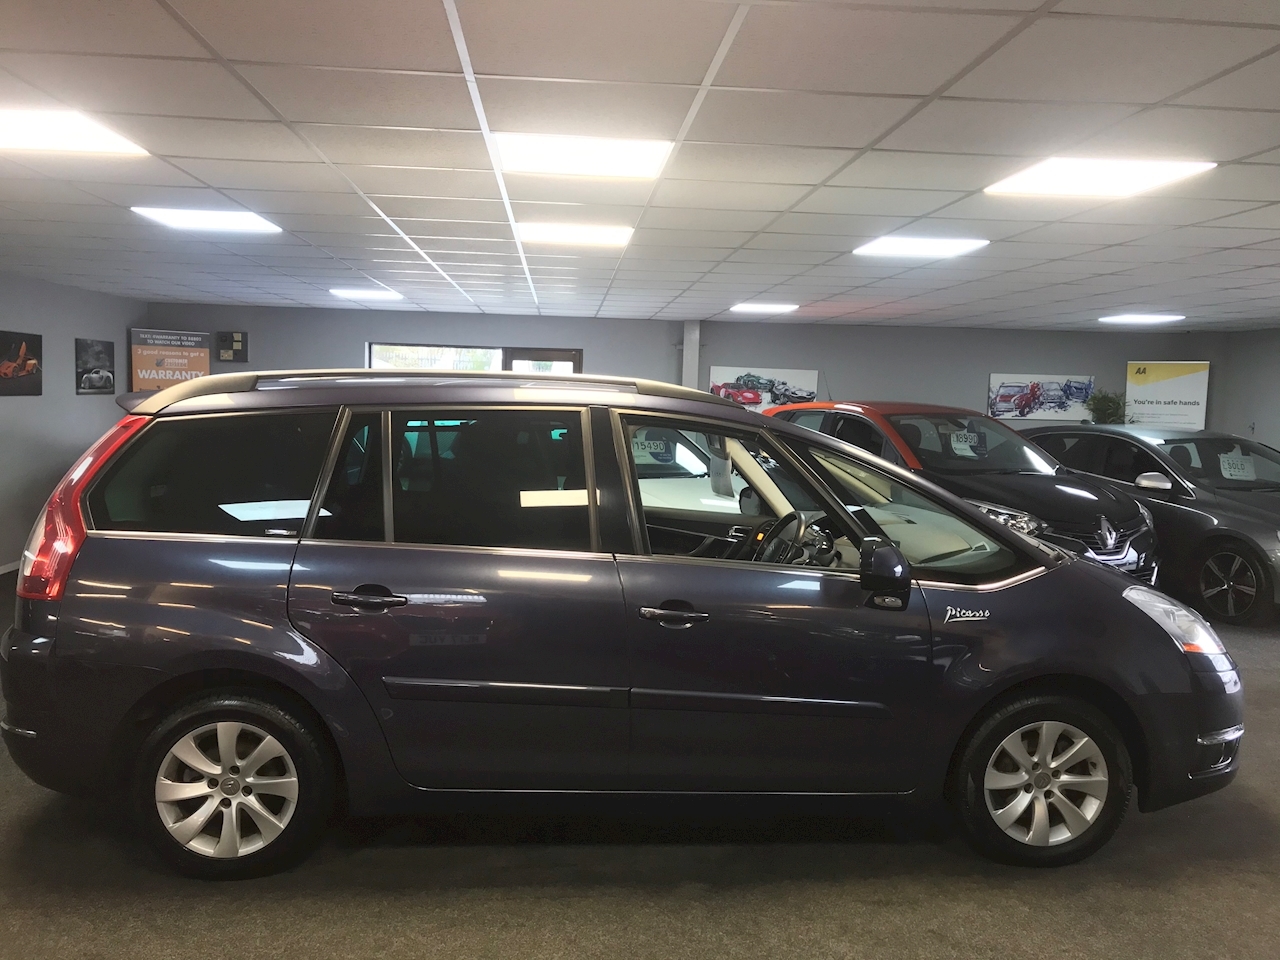 Grand C4 Picasso Exclusive MPV 1.6 EGS Diesel